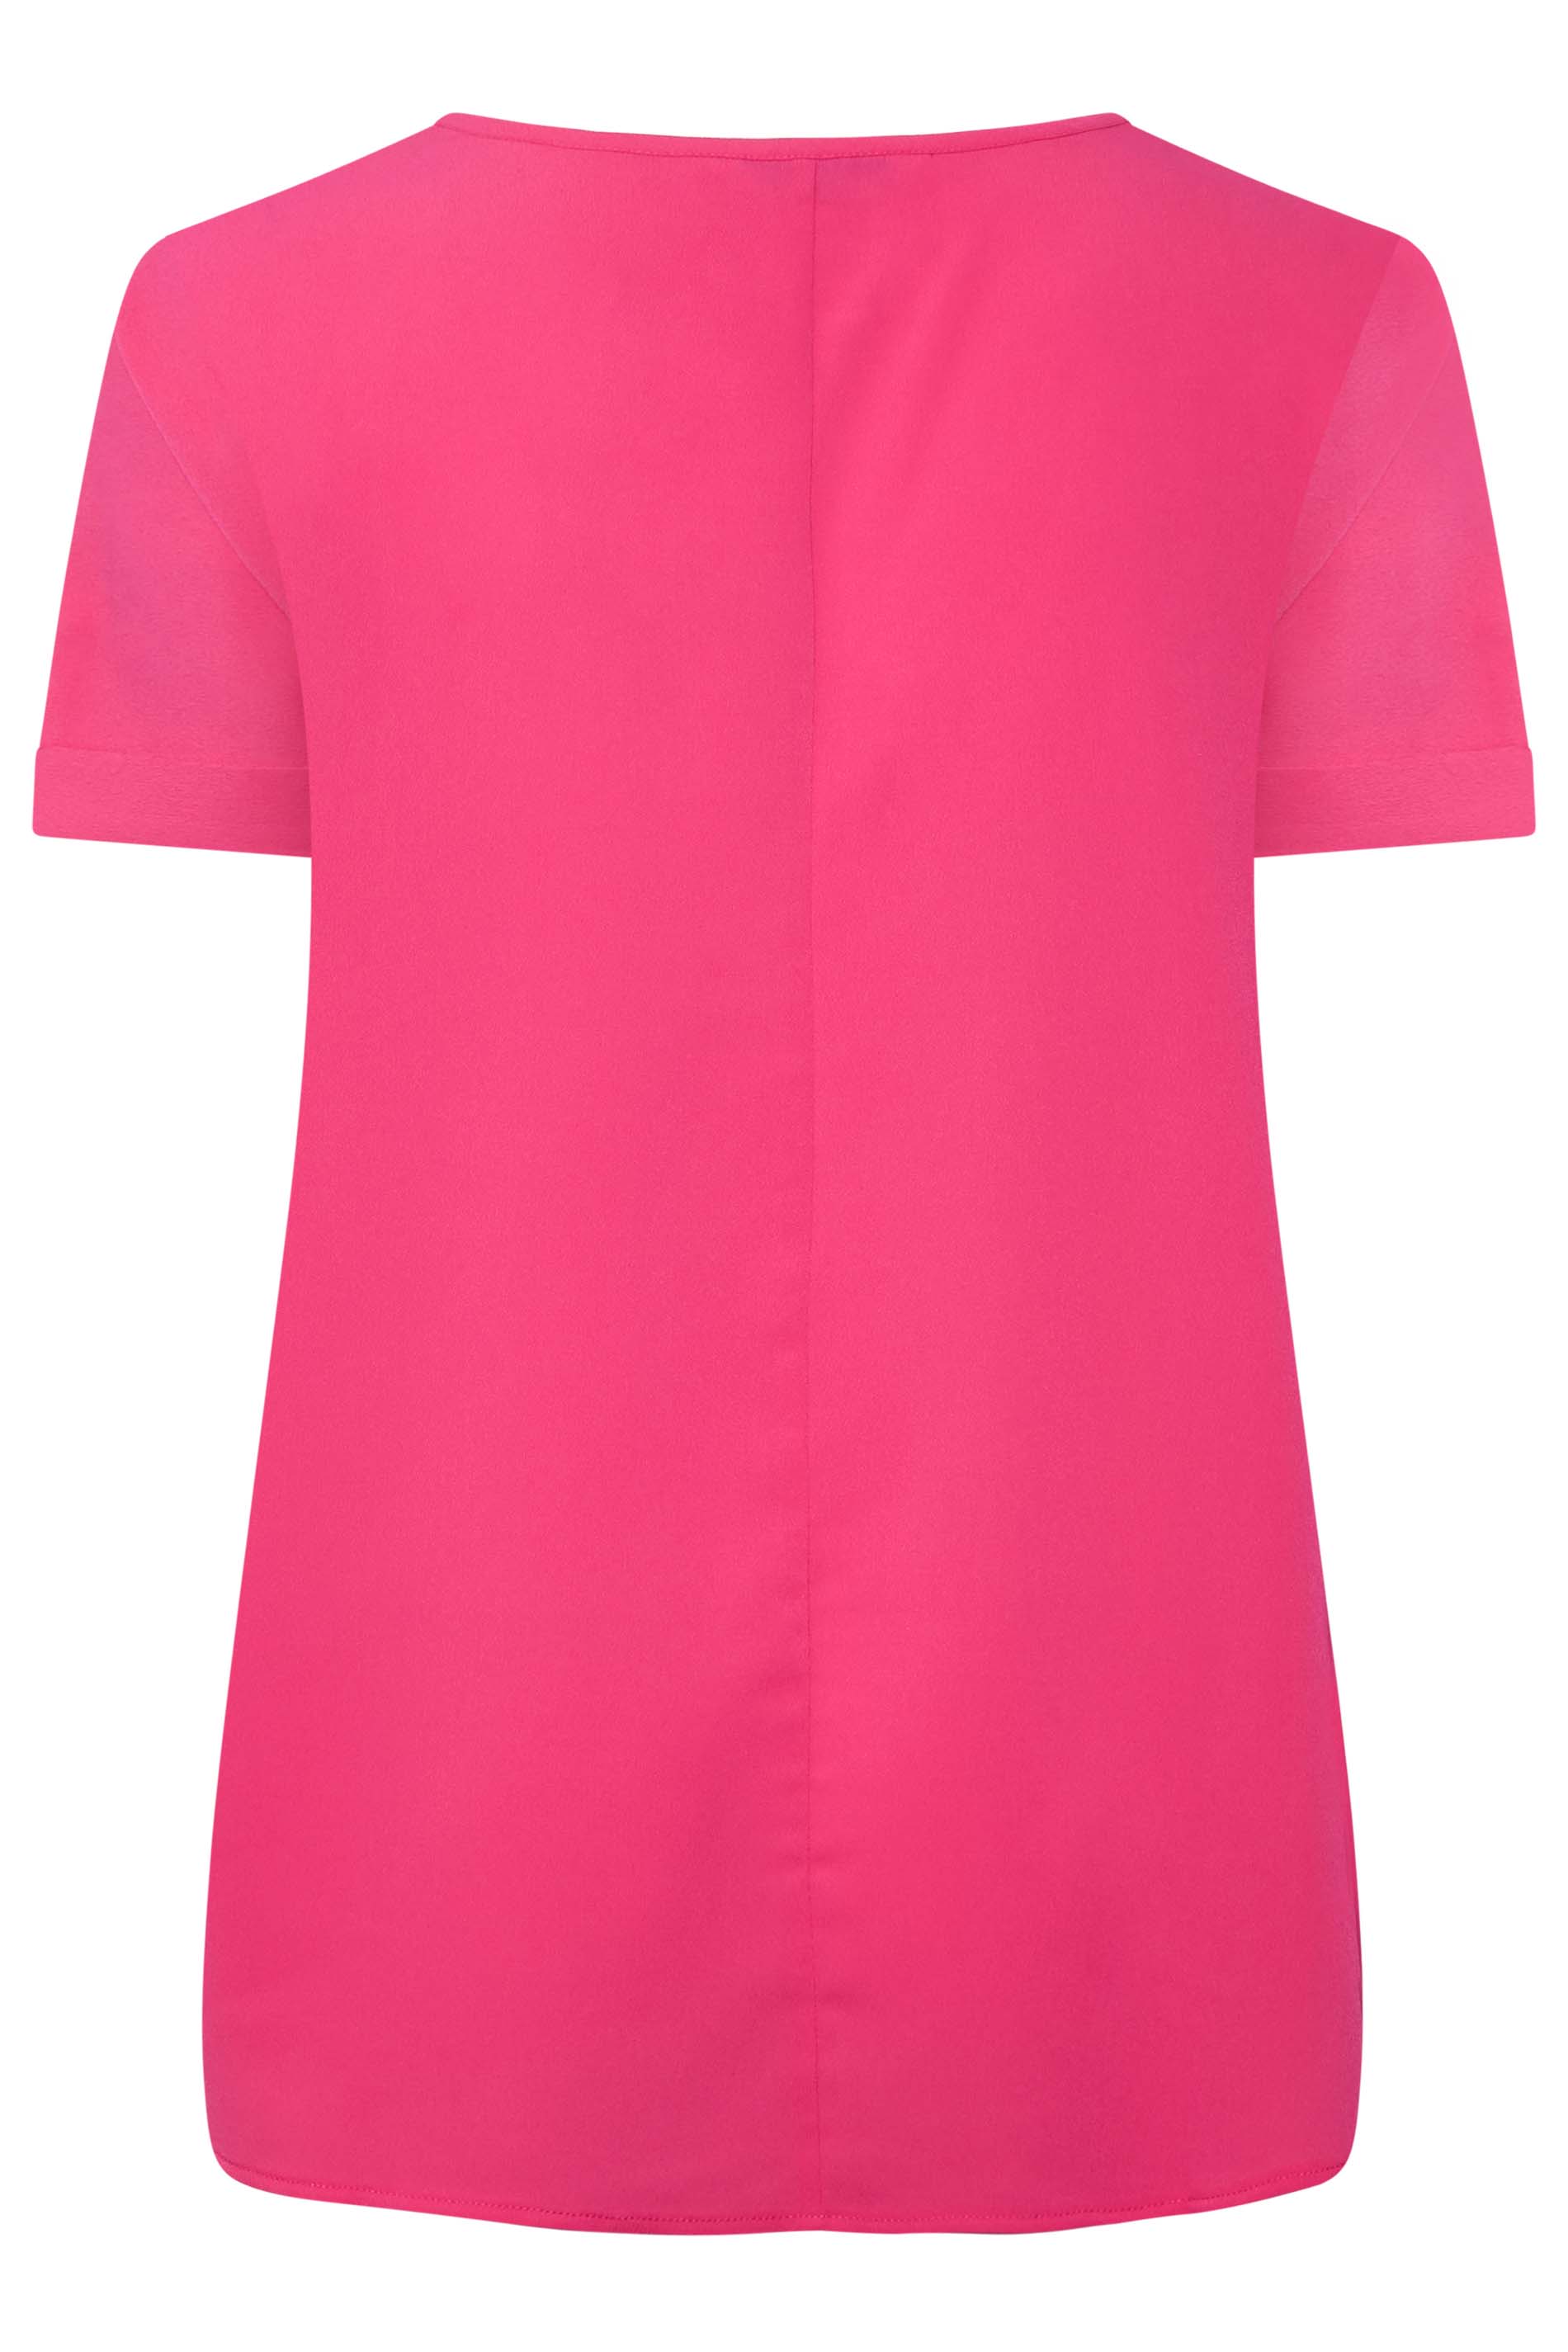 YOURS Plus Size Hot Pink Short Sleeve Boxy Top | Yours Clothing